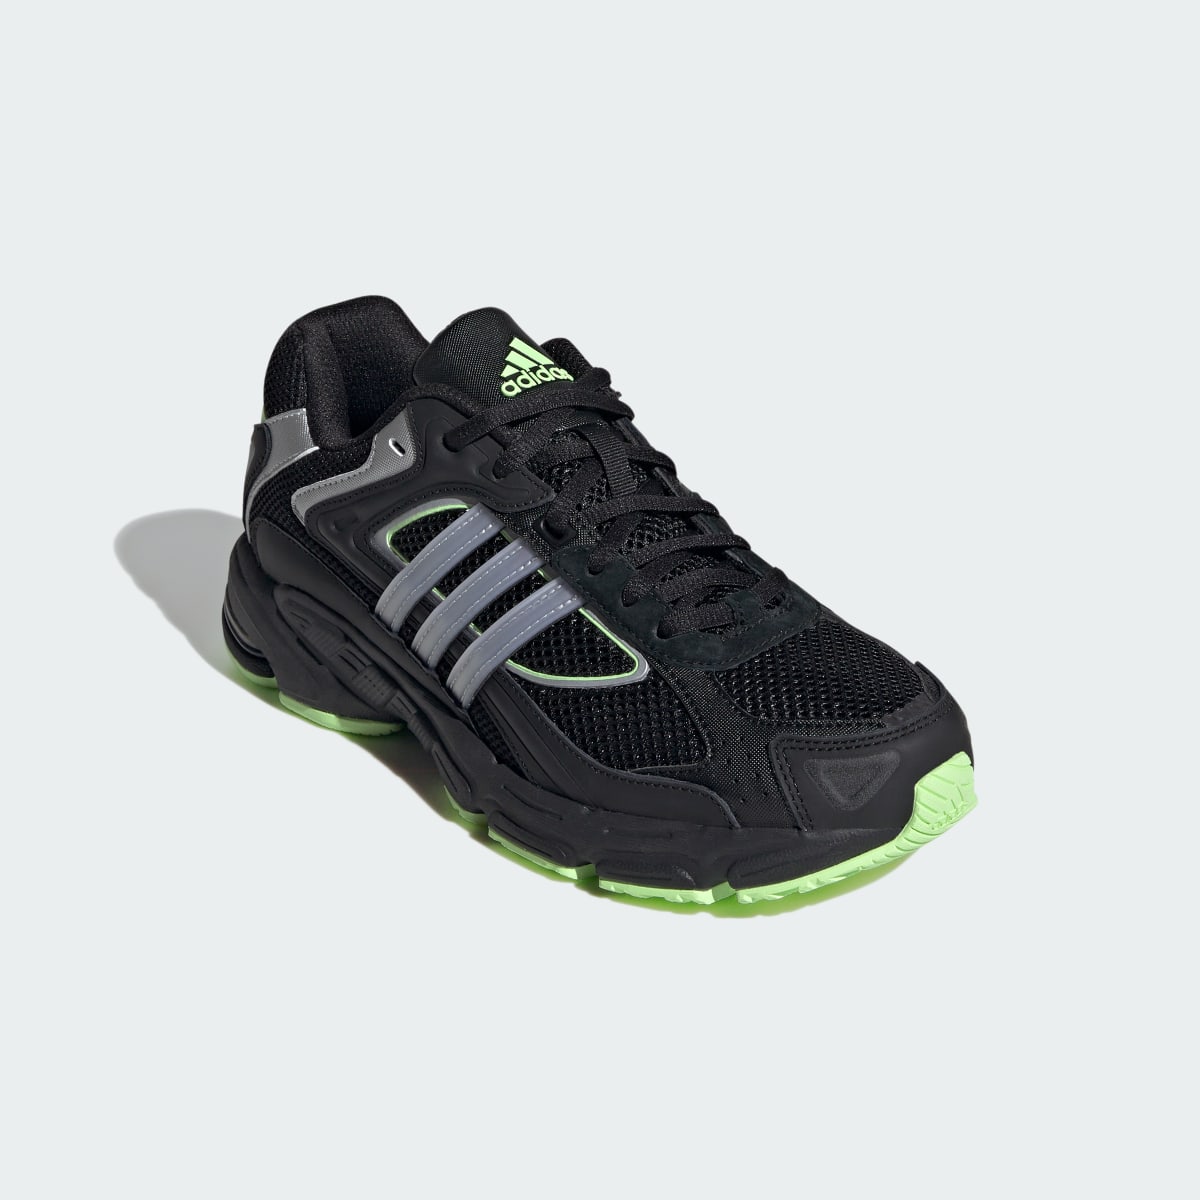 Adidas Response CL Shoes. 5